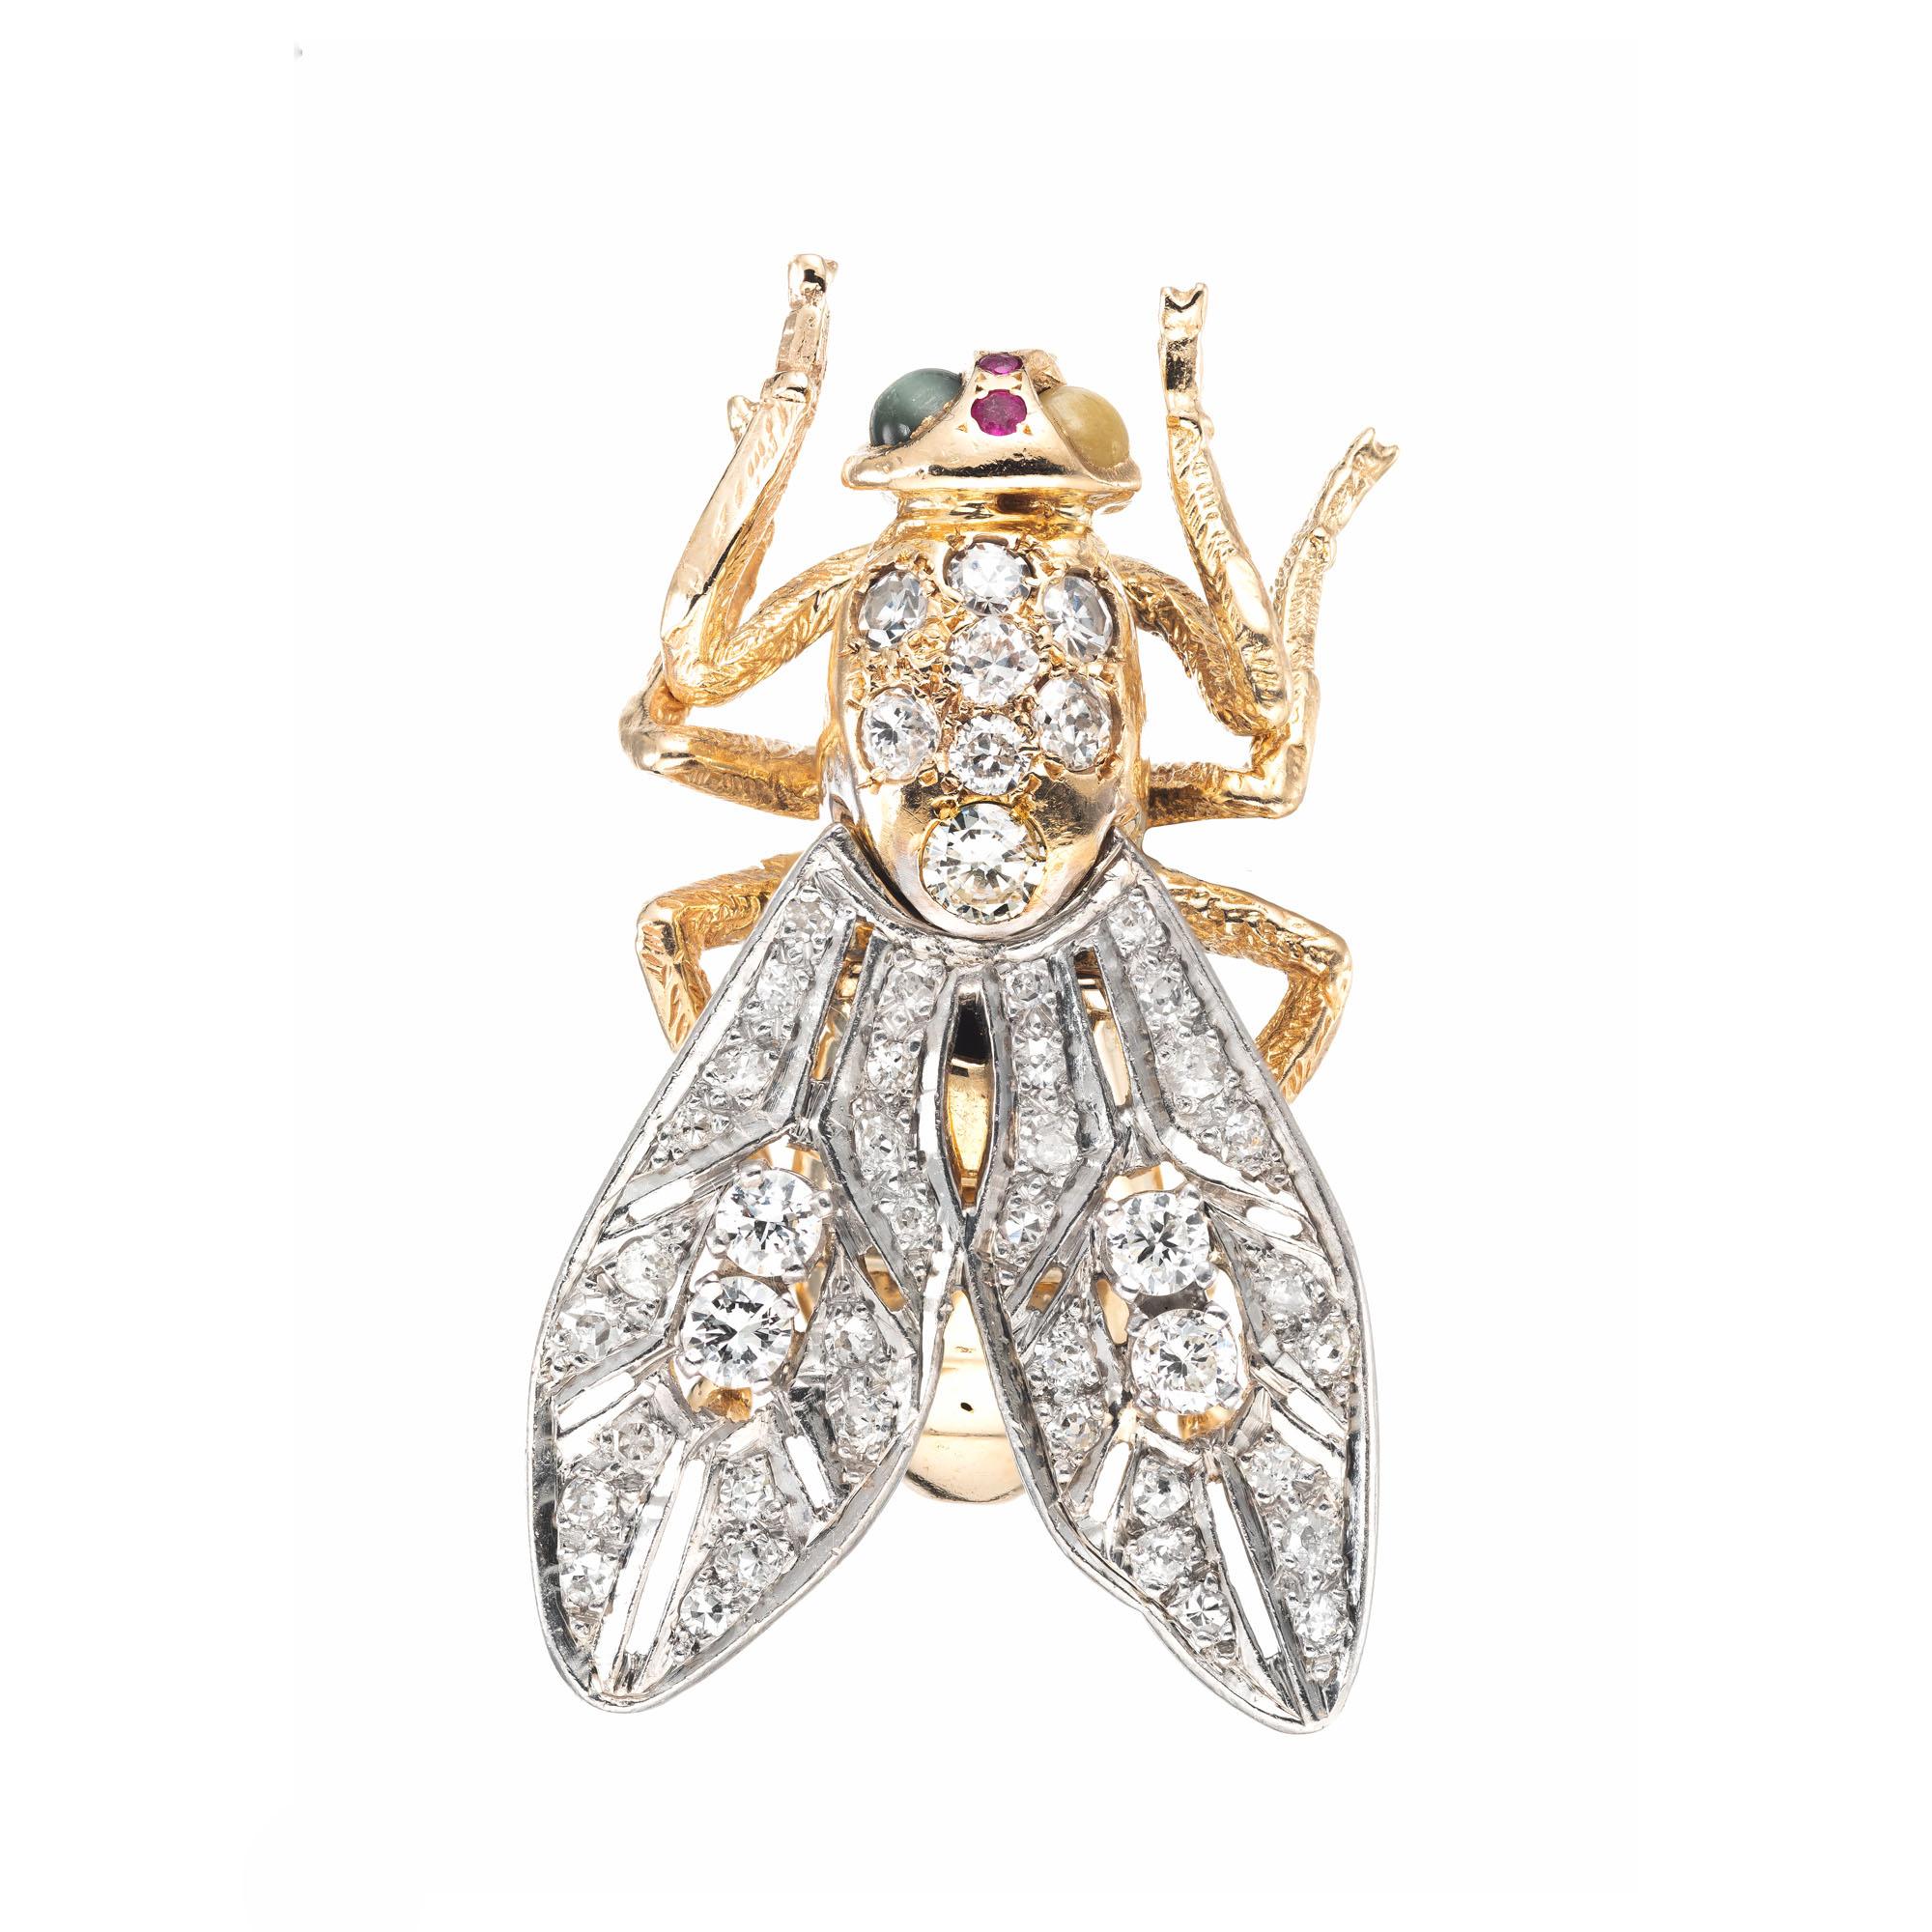 Mid-Century Three-dimensional large fly brooch in 14k yellow and white gold with movable wings set with 1.70 carats of mixed diamonds, ruby accents and quartz cats and tiger eyes.

4 round brilliant cut diamonds, G-H VS2 approx. .40cts
36 old Euro